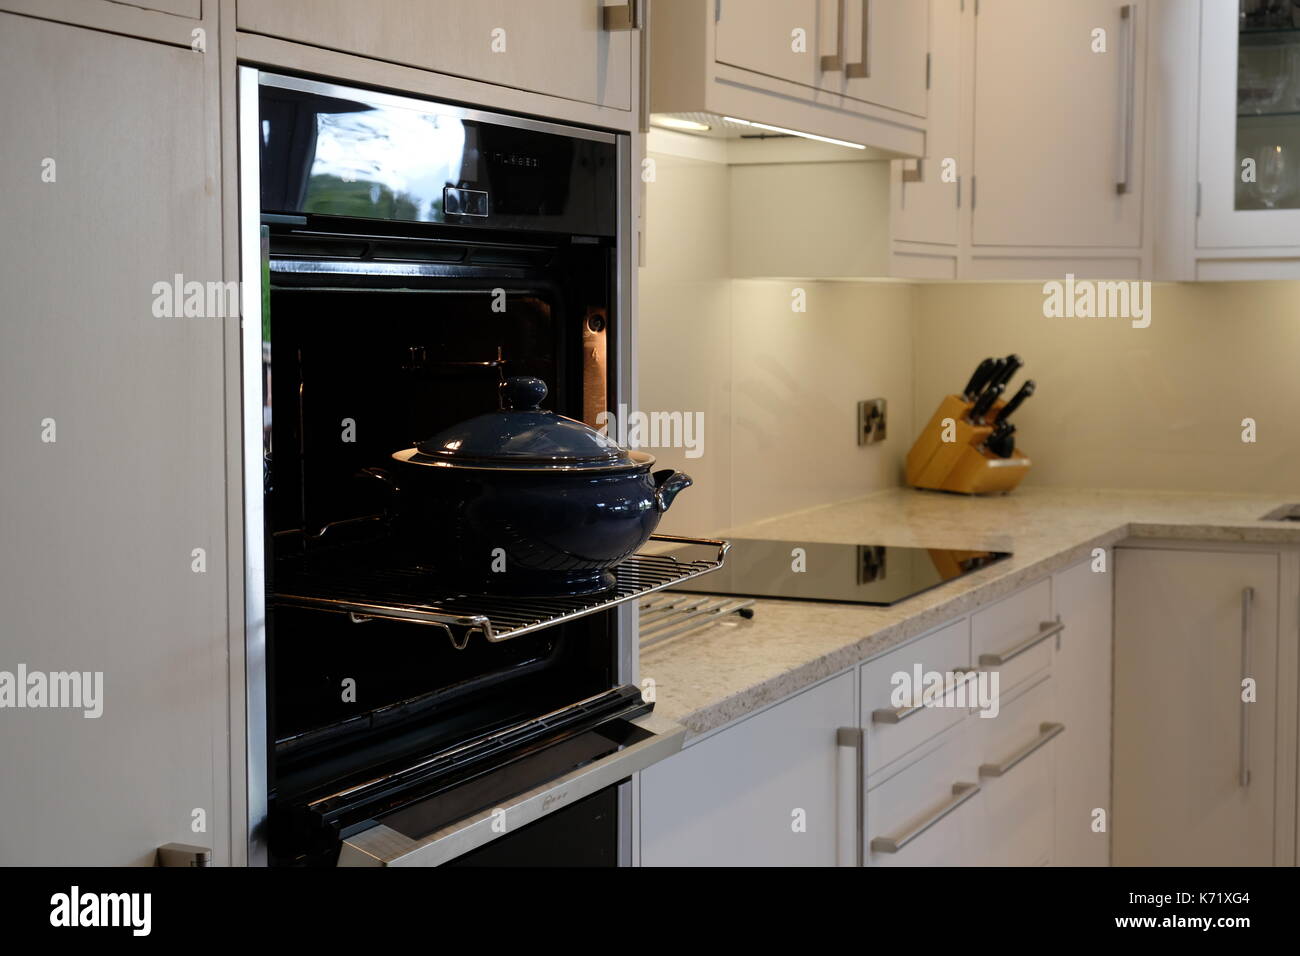 Contemporary kitchen,  Period House, Clean and Uncluttered, Modern, Grey Finnish, Bespoke, Design, Victorian House, Cheshire, England, Granite. Stock Photo